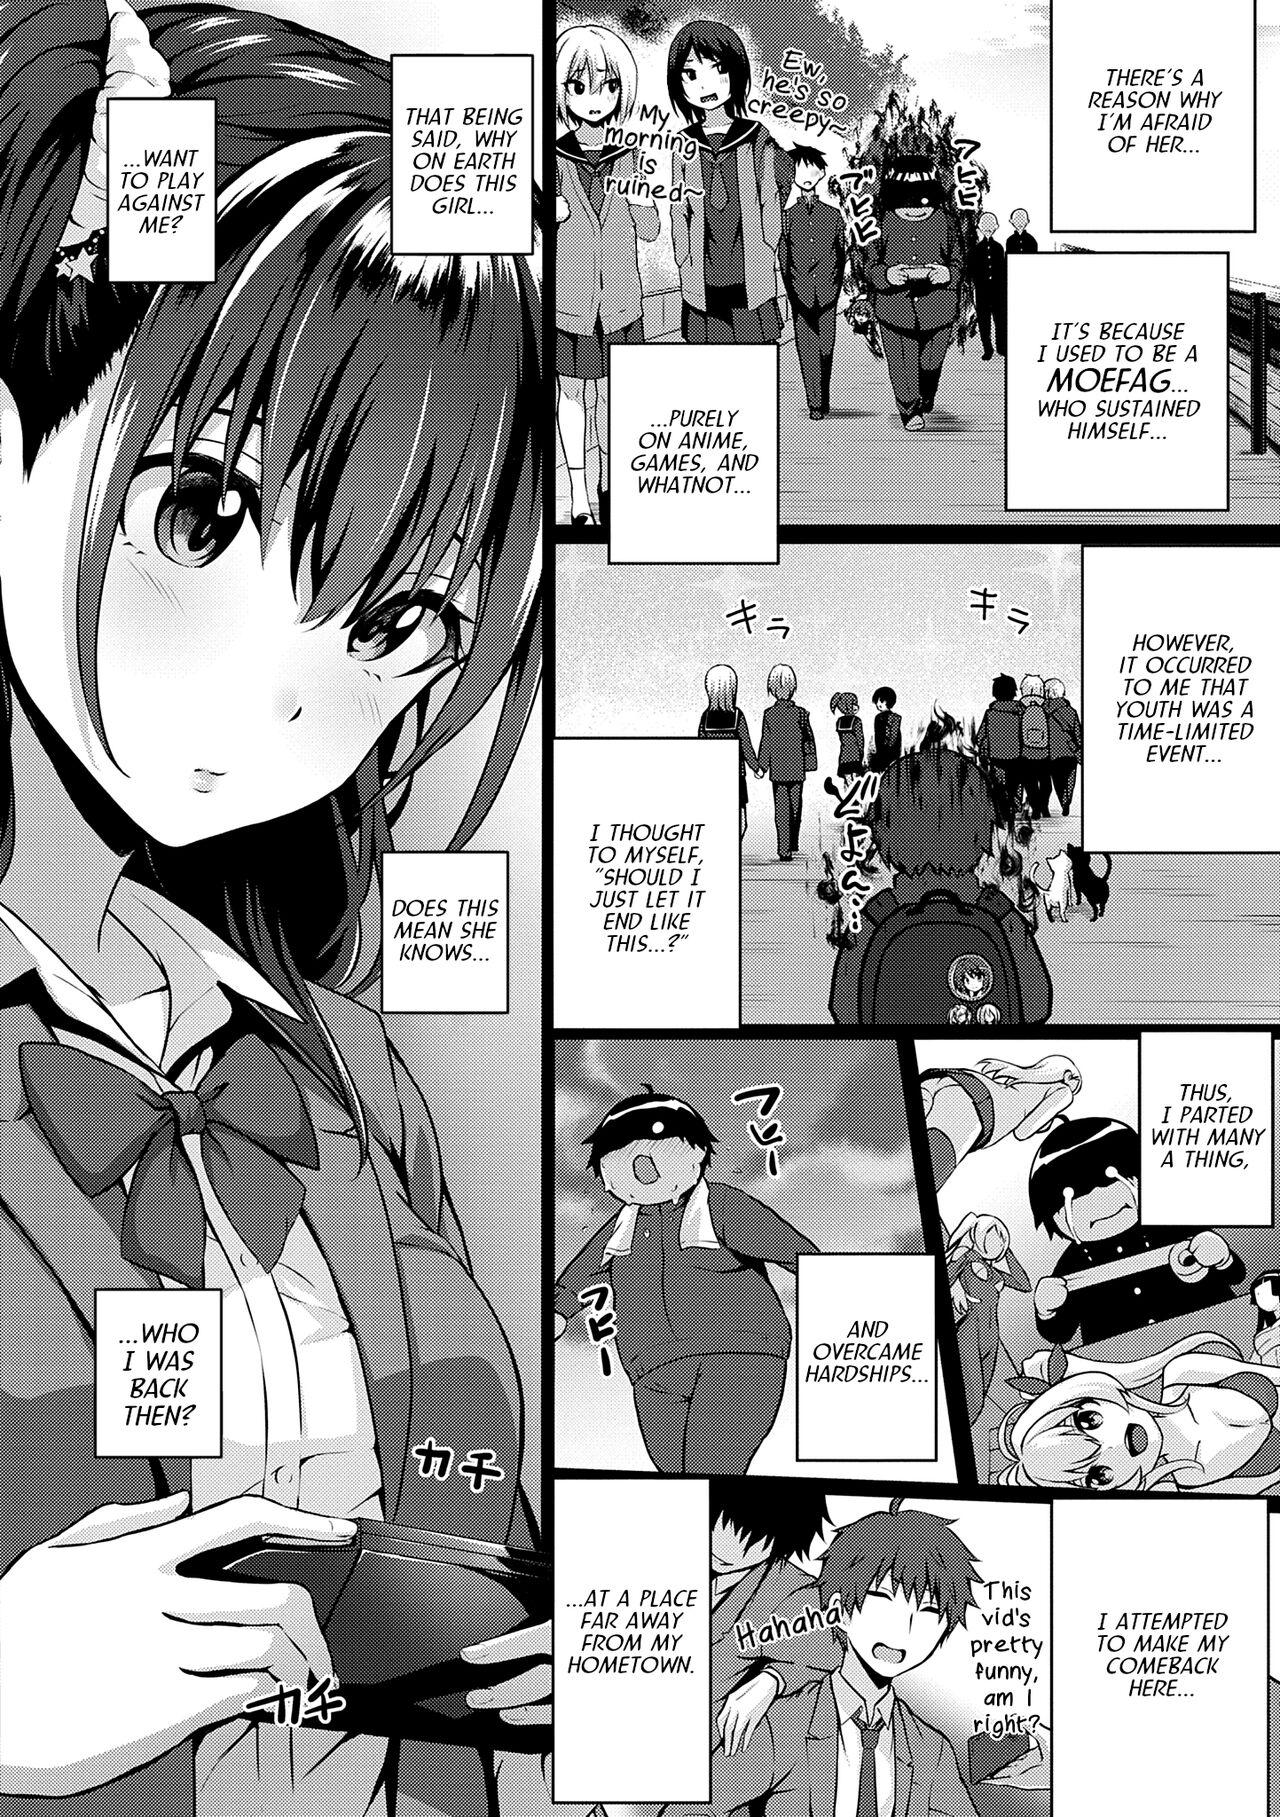 Fucking Pussy Flag Kaishuu wa Totsuzen ni | The Puzzle Pieces Are Suddenly Coming Together Morrita - Page 2